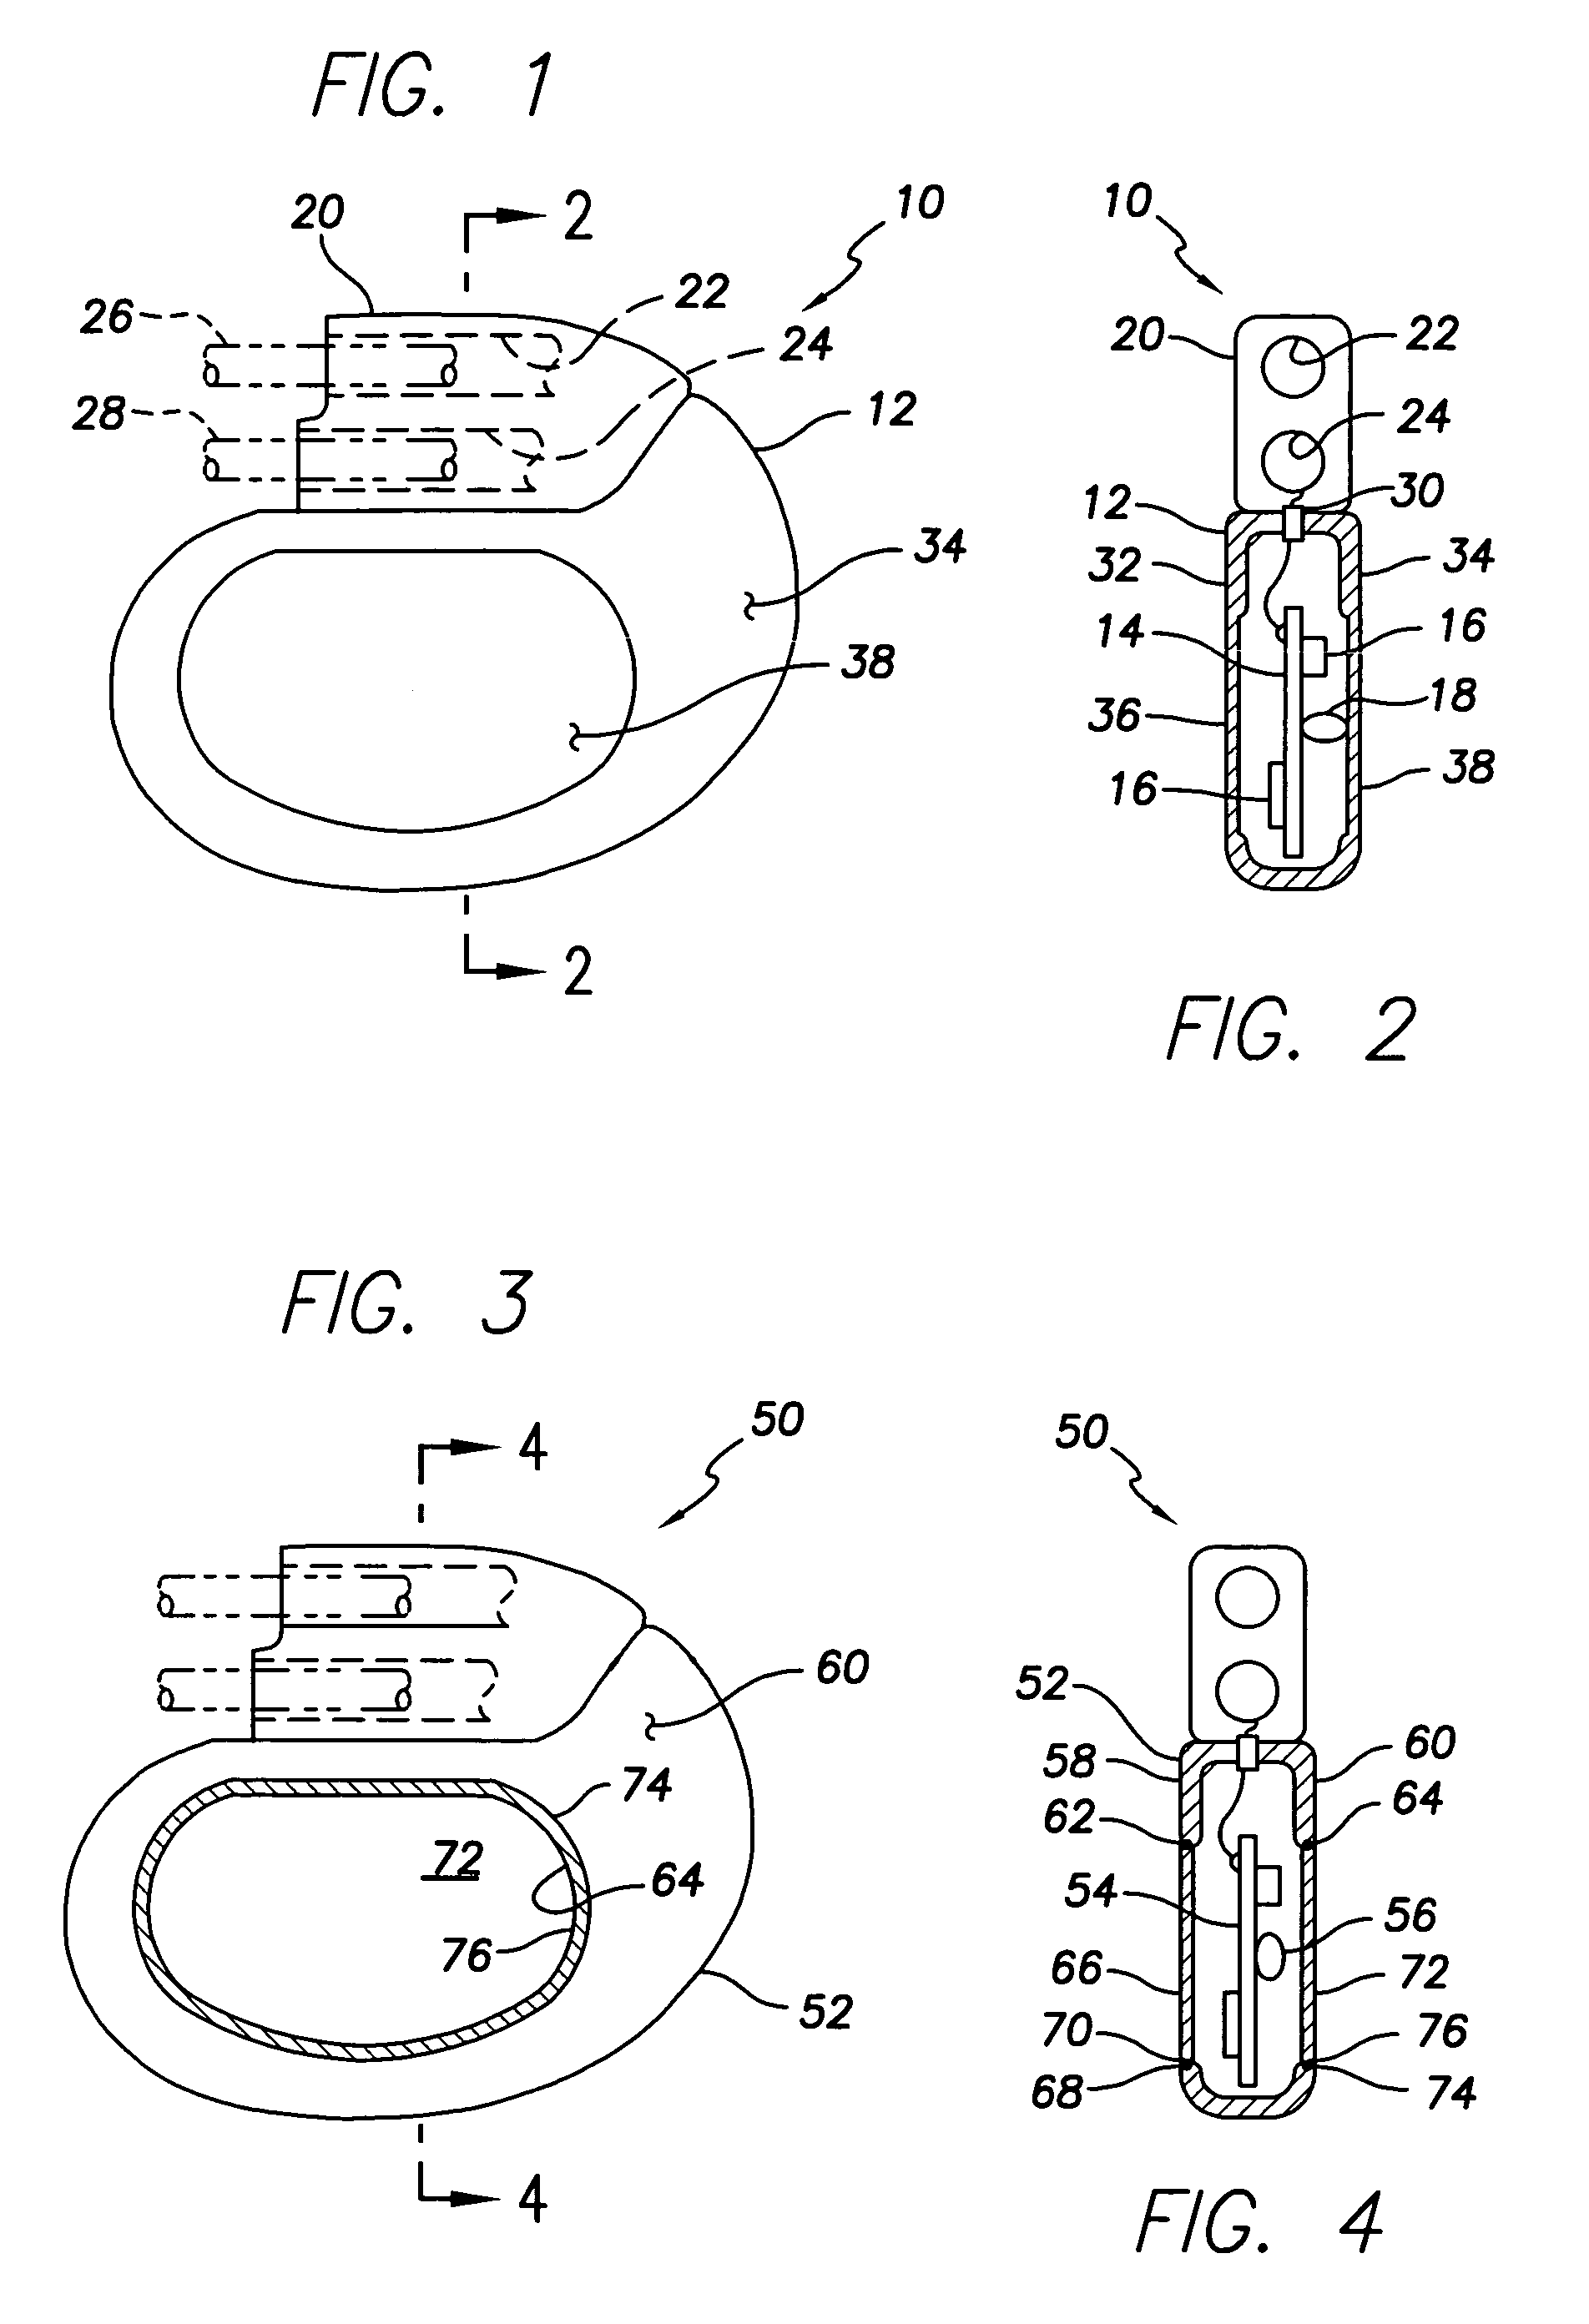 Implantable medical device having a casing providing high-speed telemetry